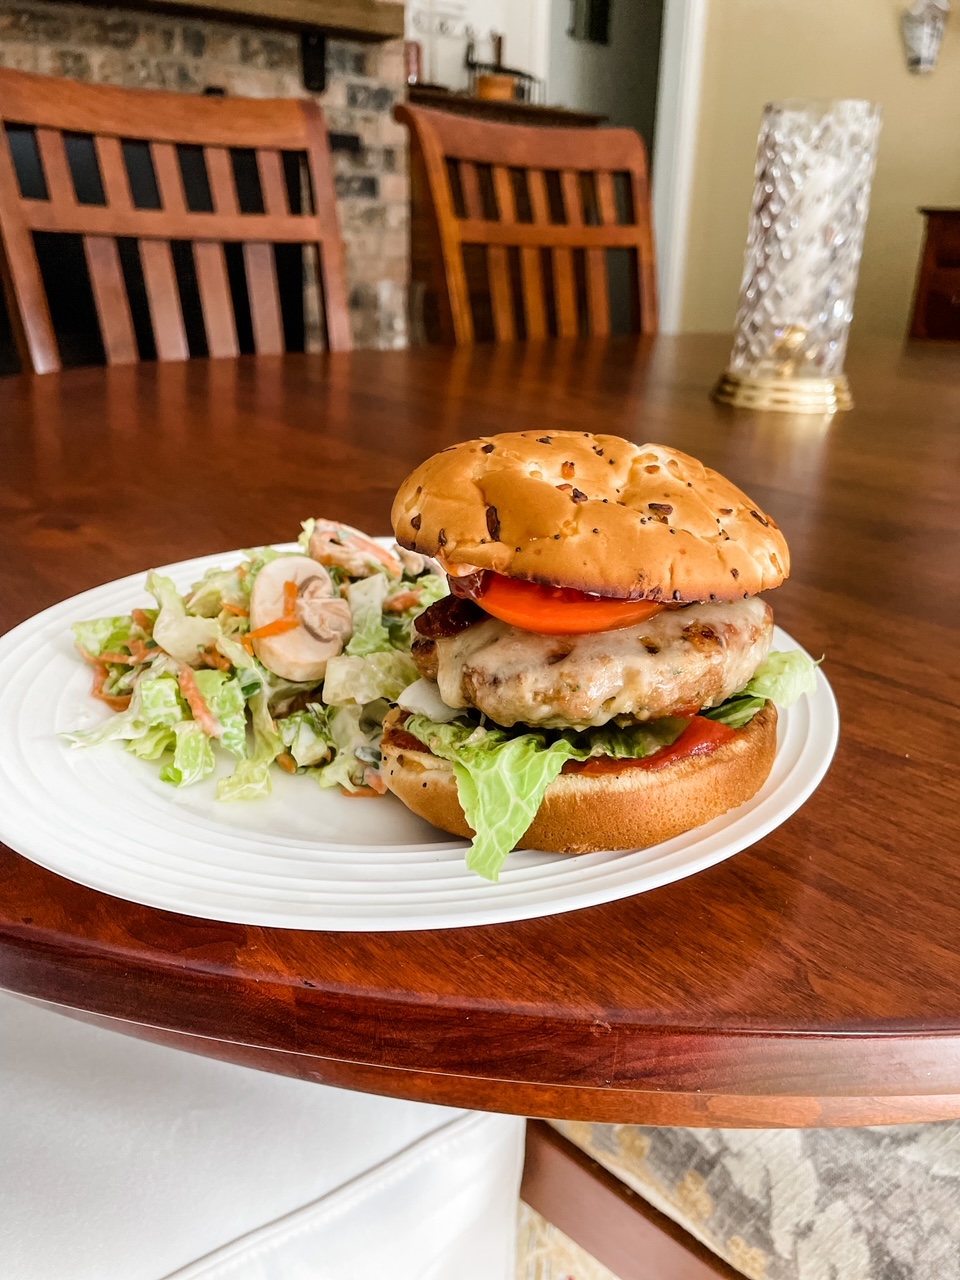 The finished Best Grilled Turkey Burgers on a plate with a side salad